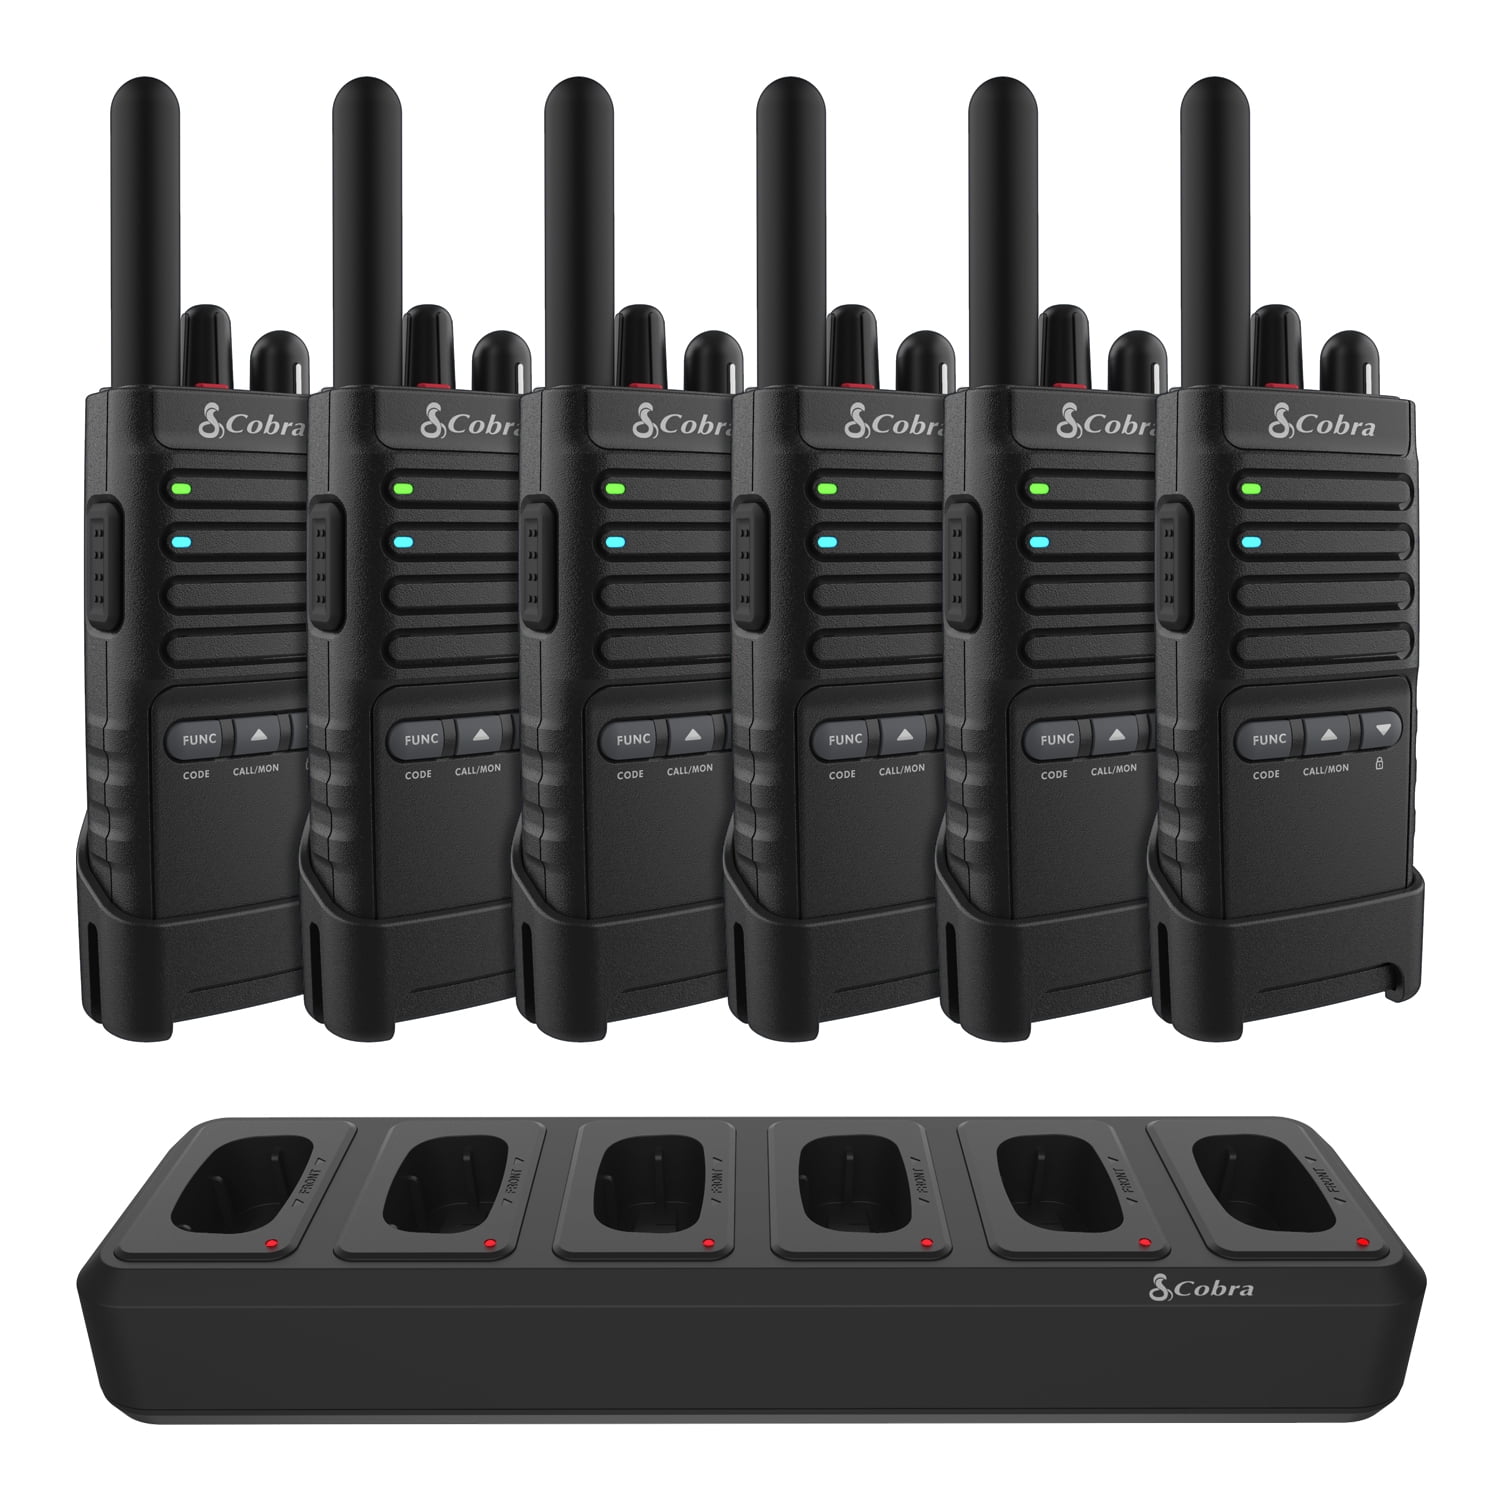 Cobra PX655 Pro Business 2W FRS Two-Way Radios (6-Pack)  Charging Dock,  Business Walkie Talkies up to 300,000 Sq ft.  25 Floors, 22 Channels,  Unlimited Expandability